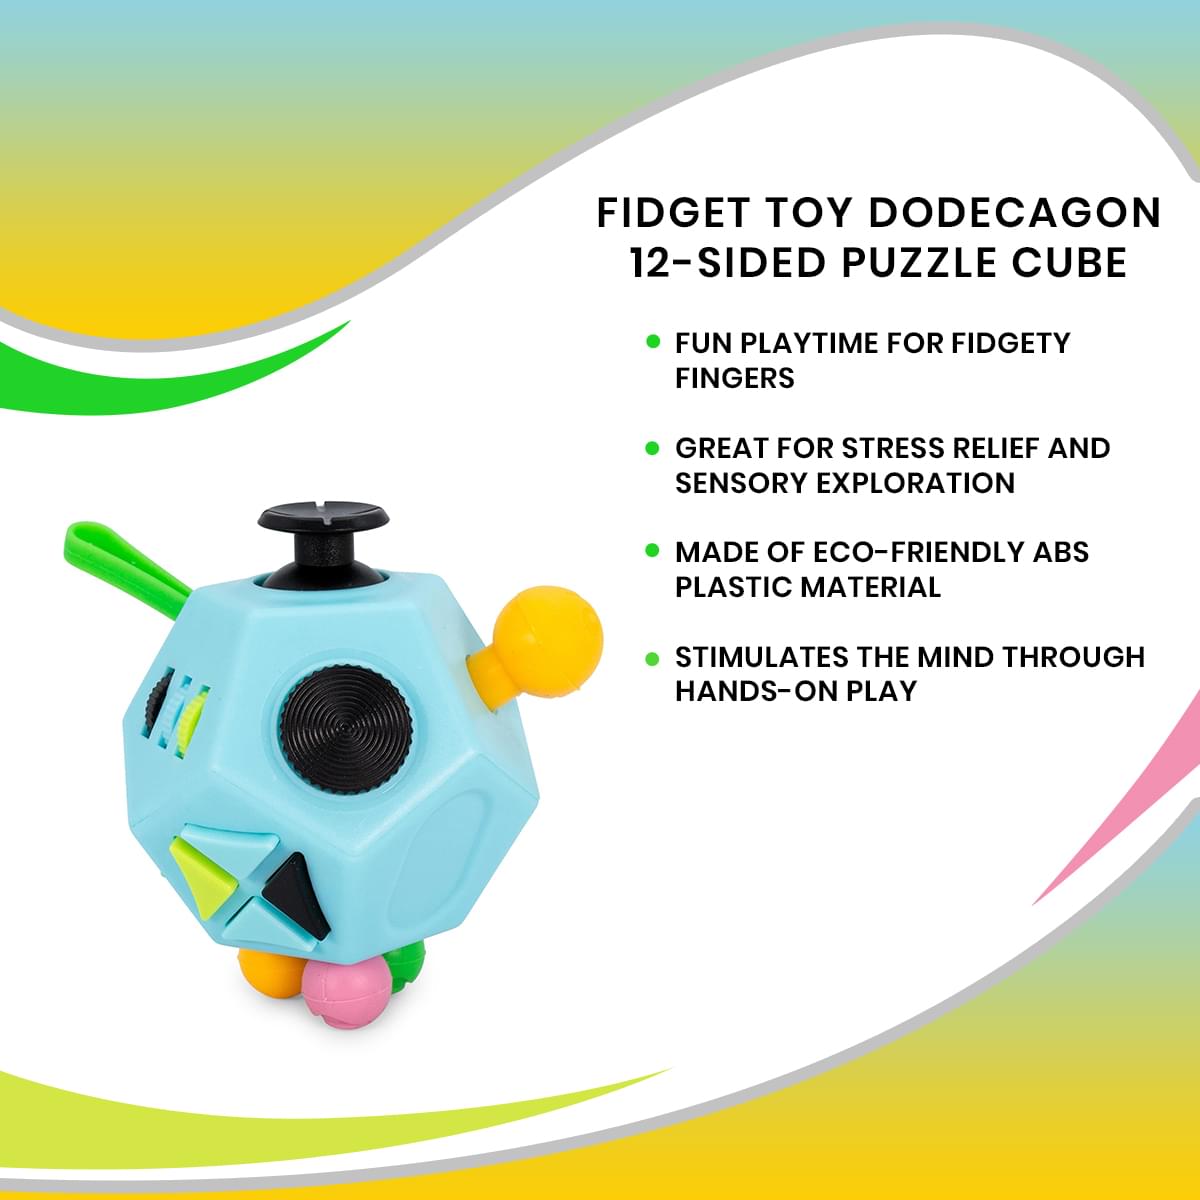 Fidget Toy Dodecagon 12-Sided Puzzle Cube